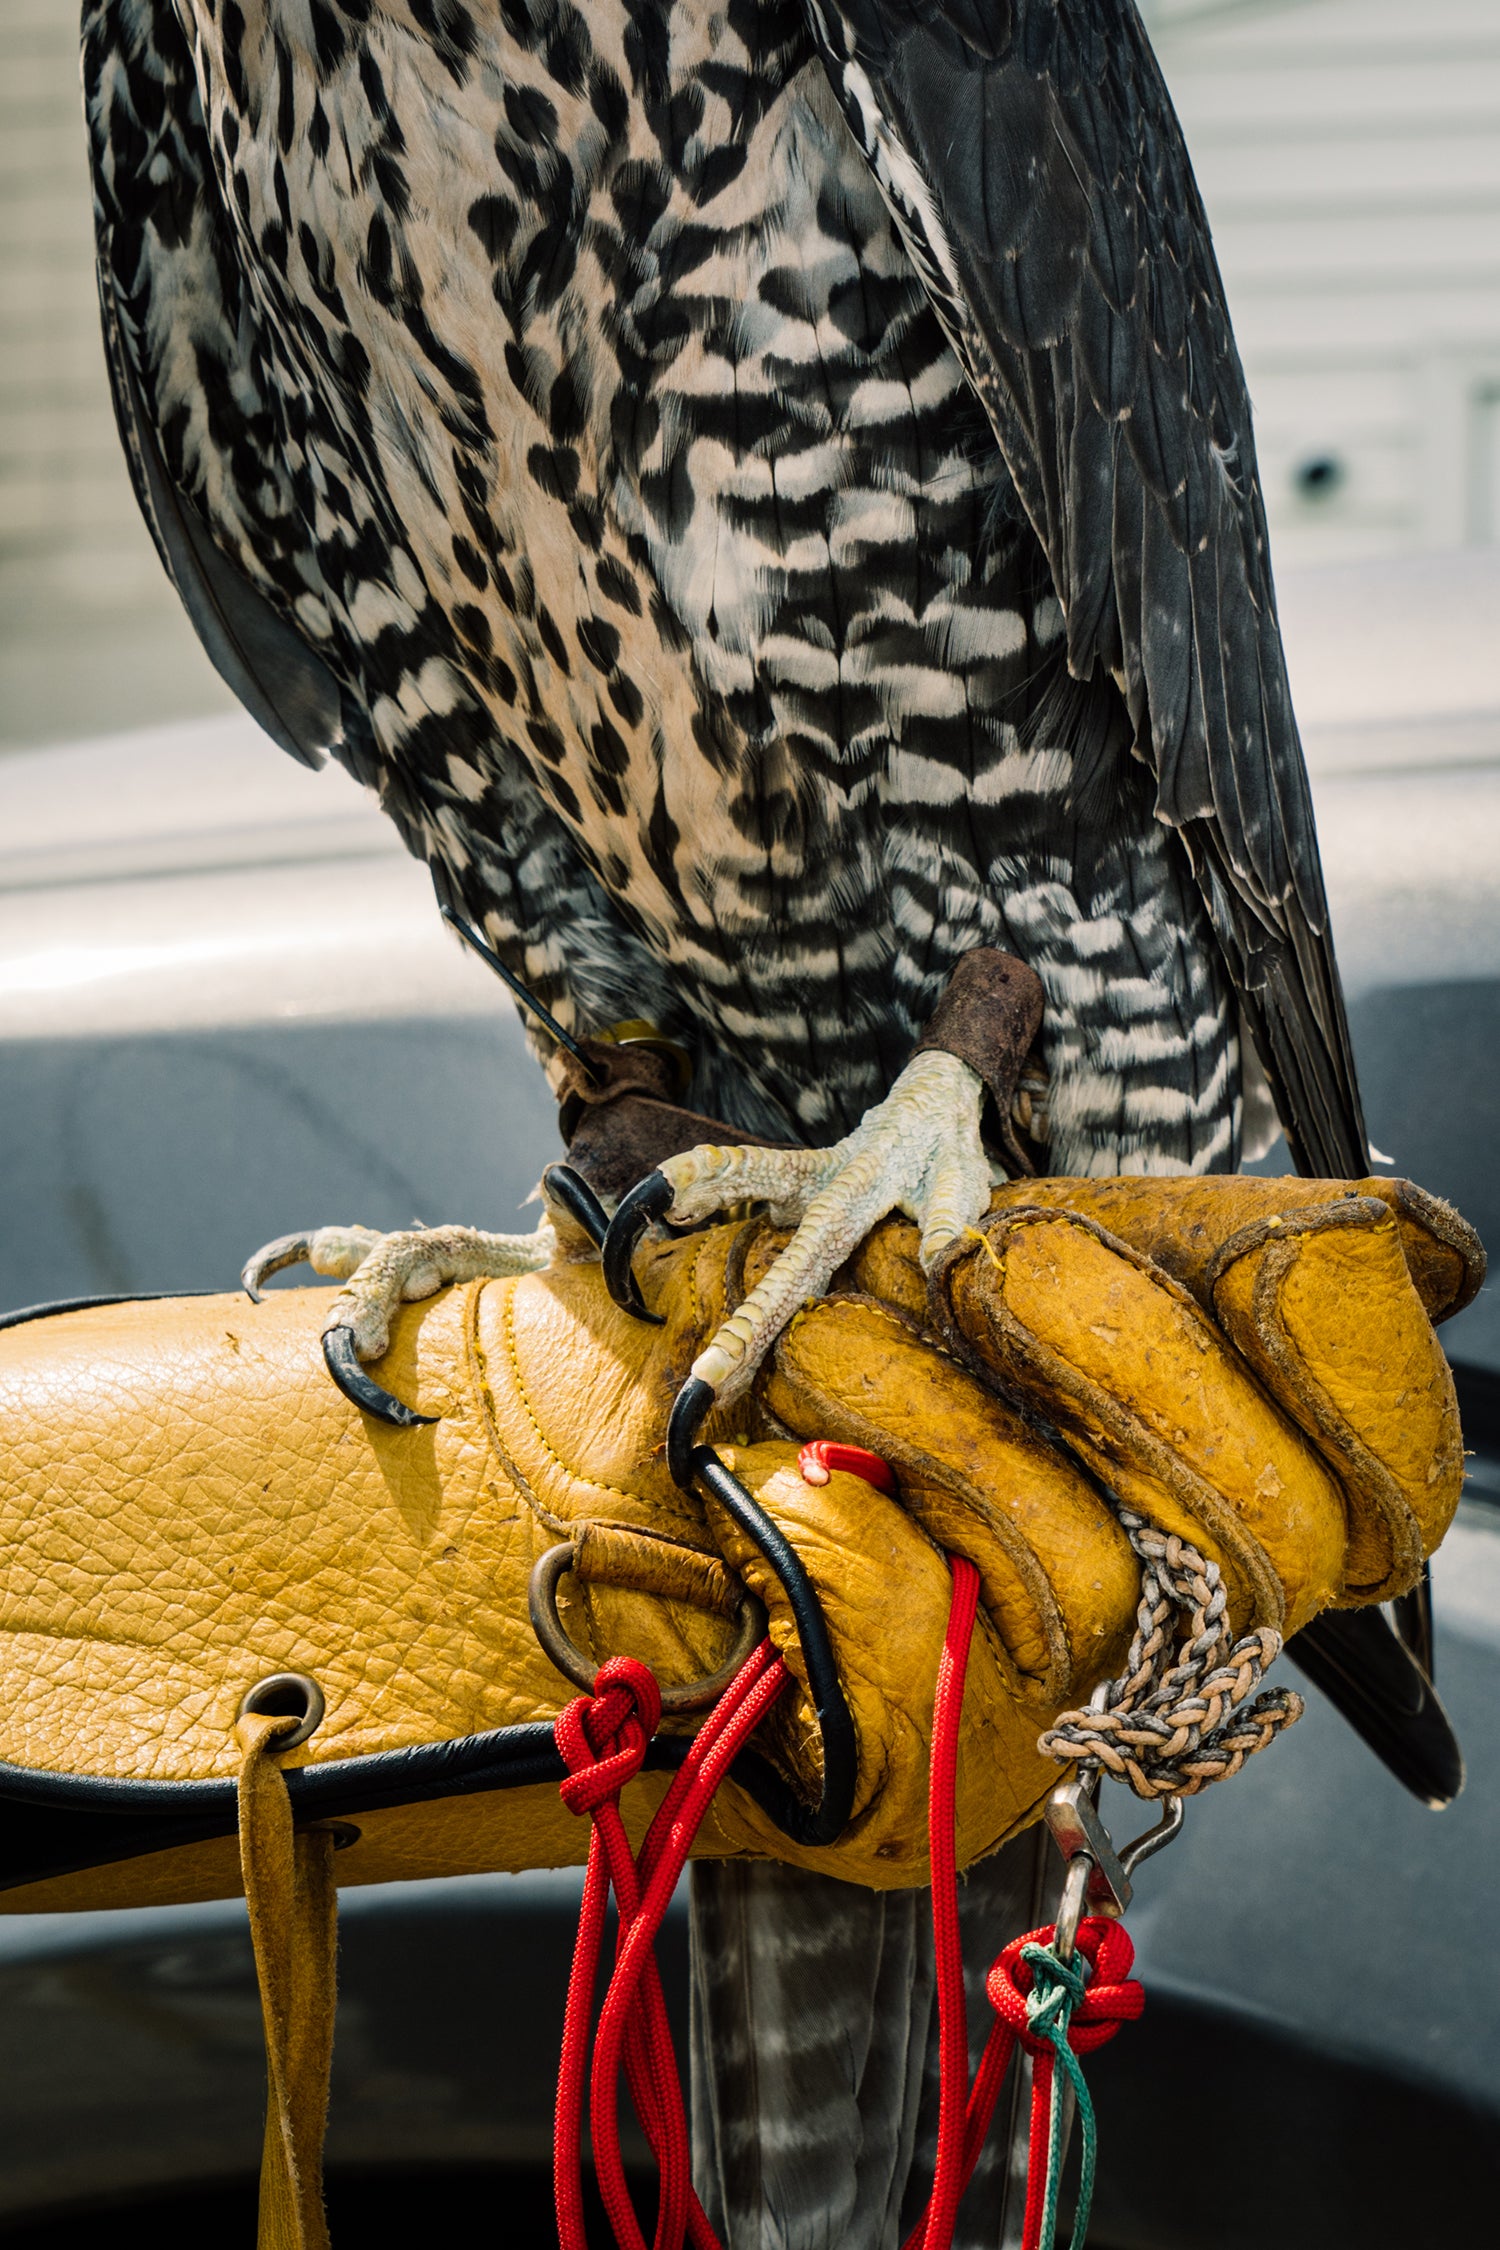 close-up of falcon's talons as bird sits on gloved hand